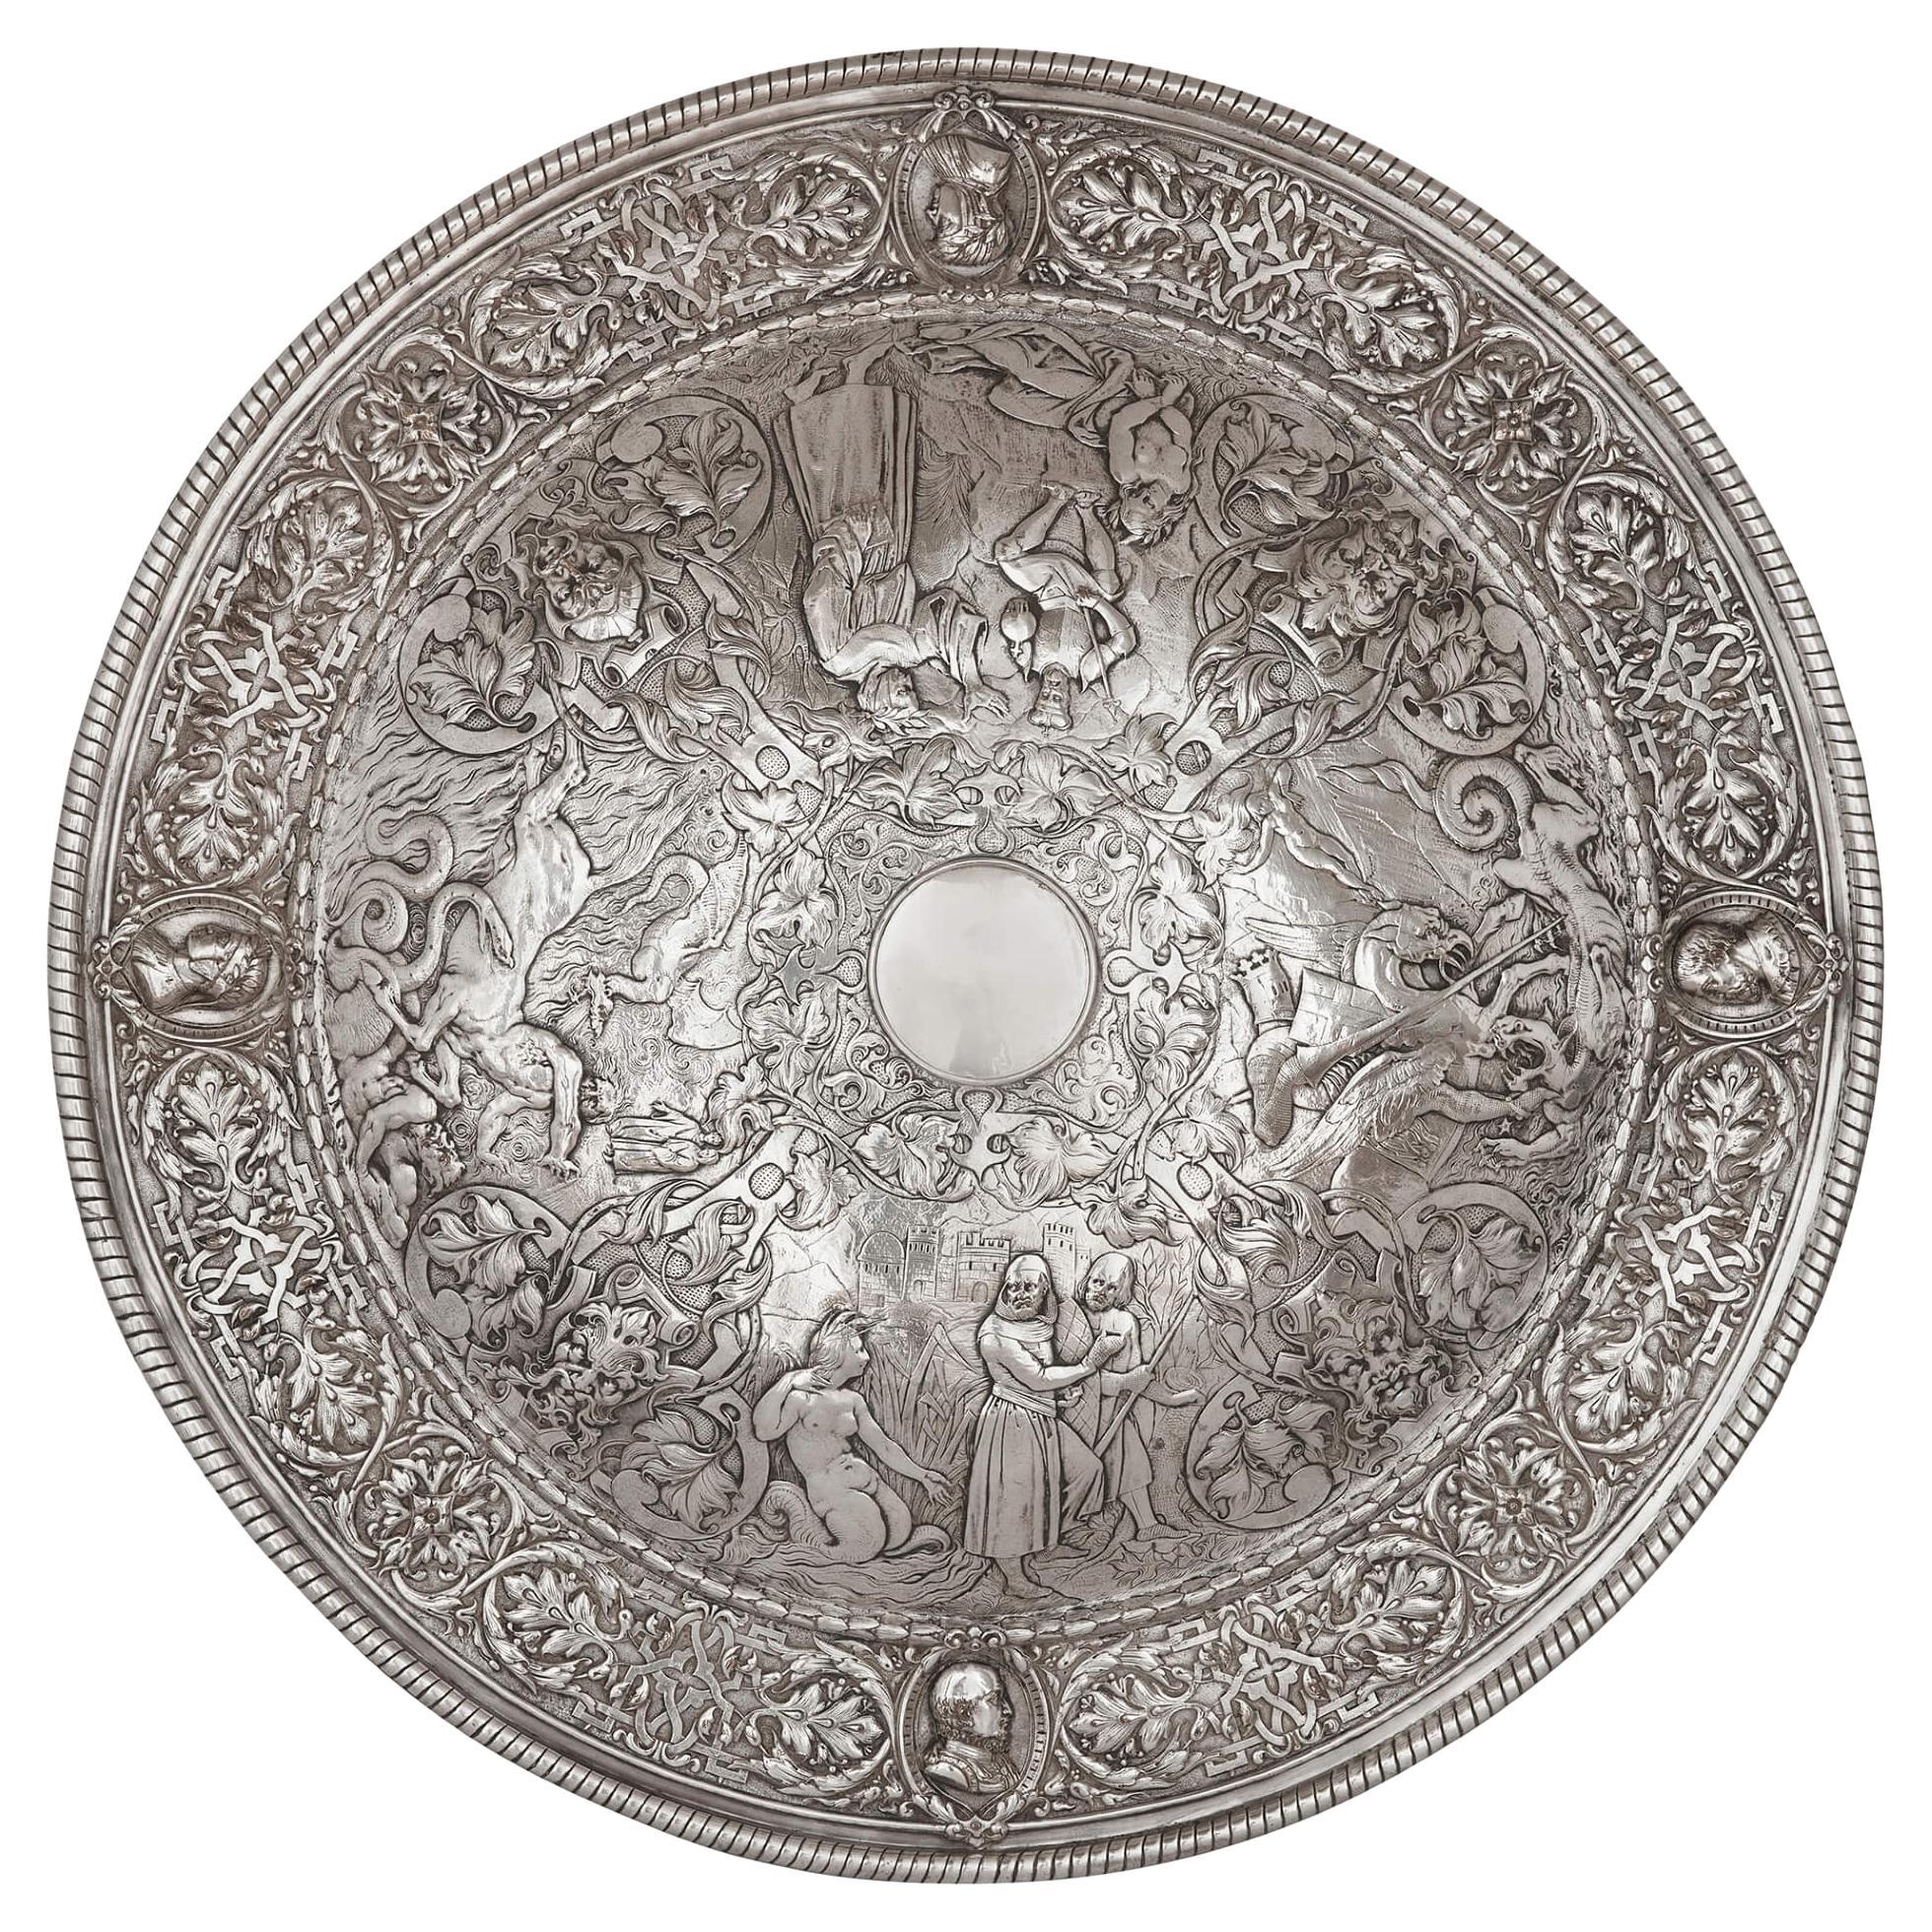 Large Silver Plated Charger with Mythological and Battle Scenes